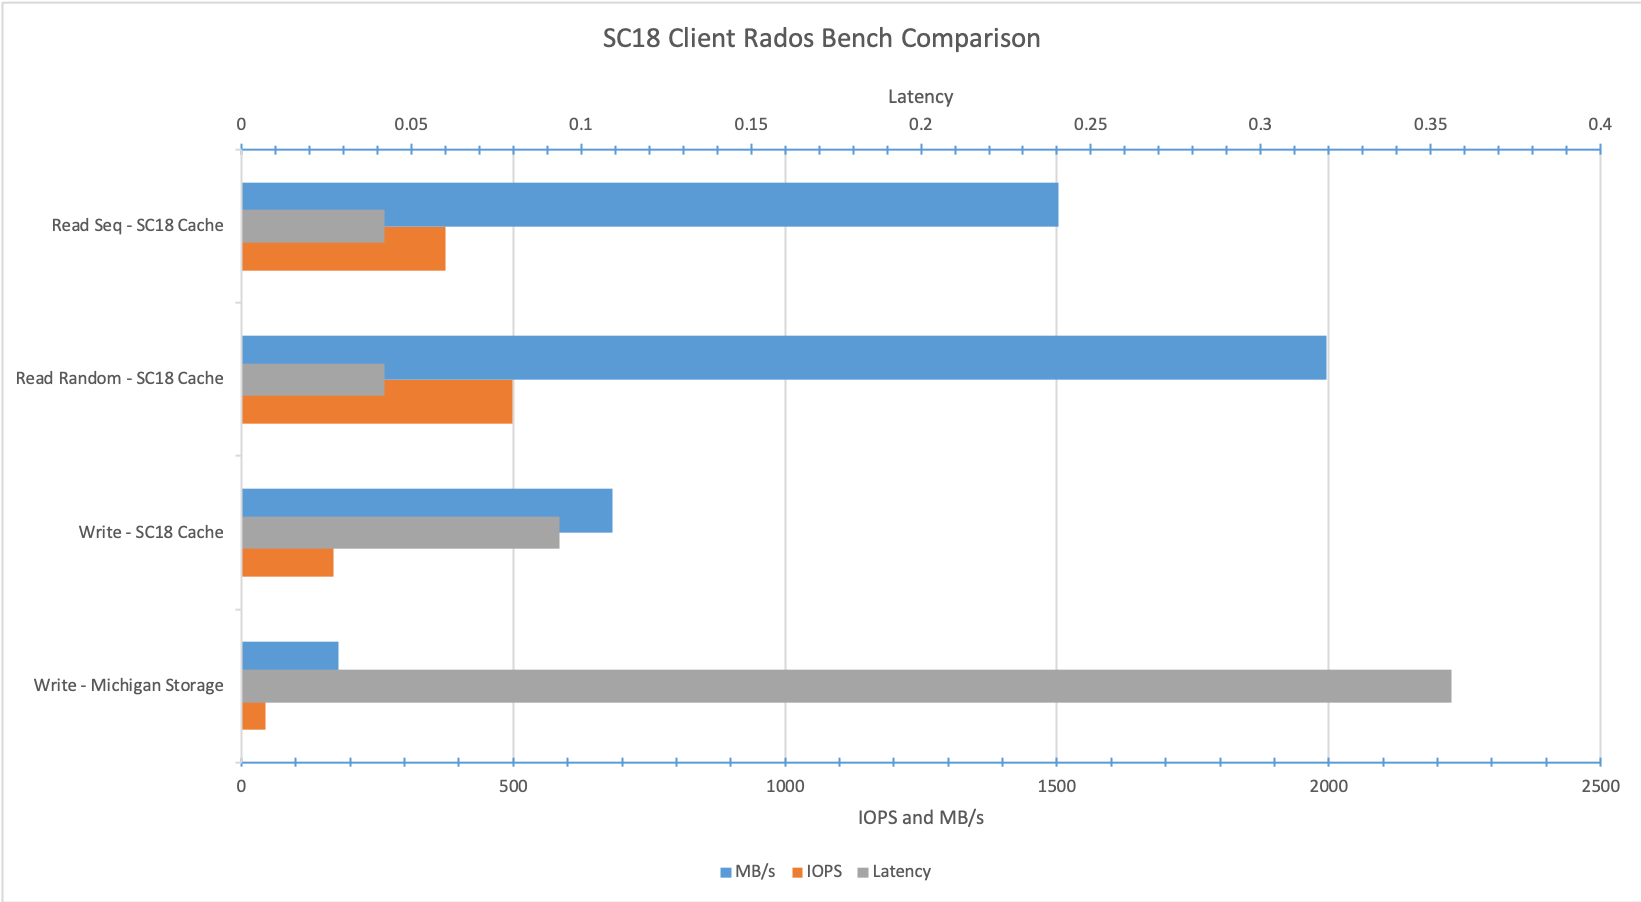 Rados benchmarks with and without cache tier